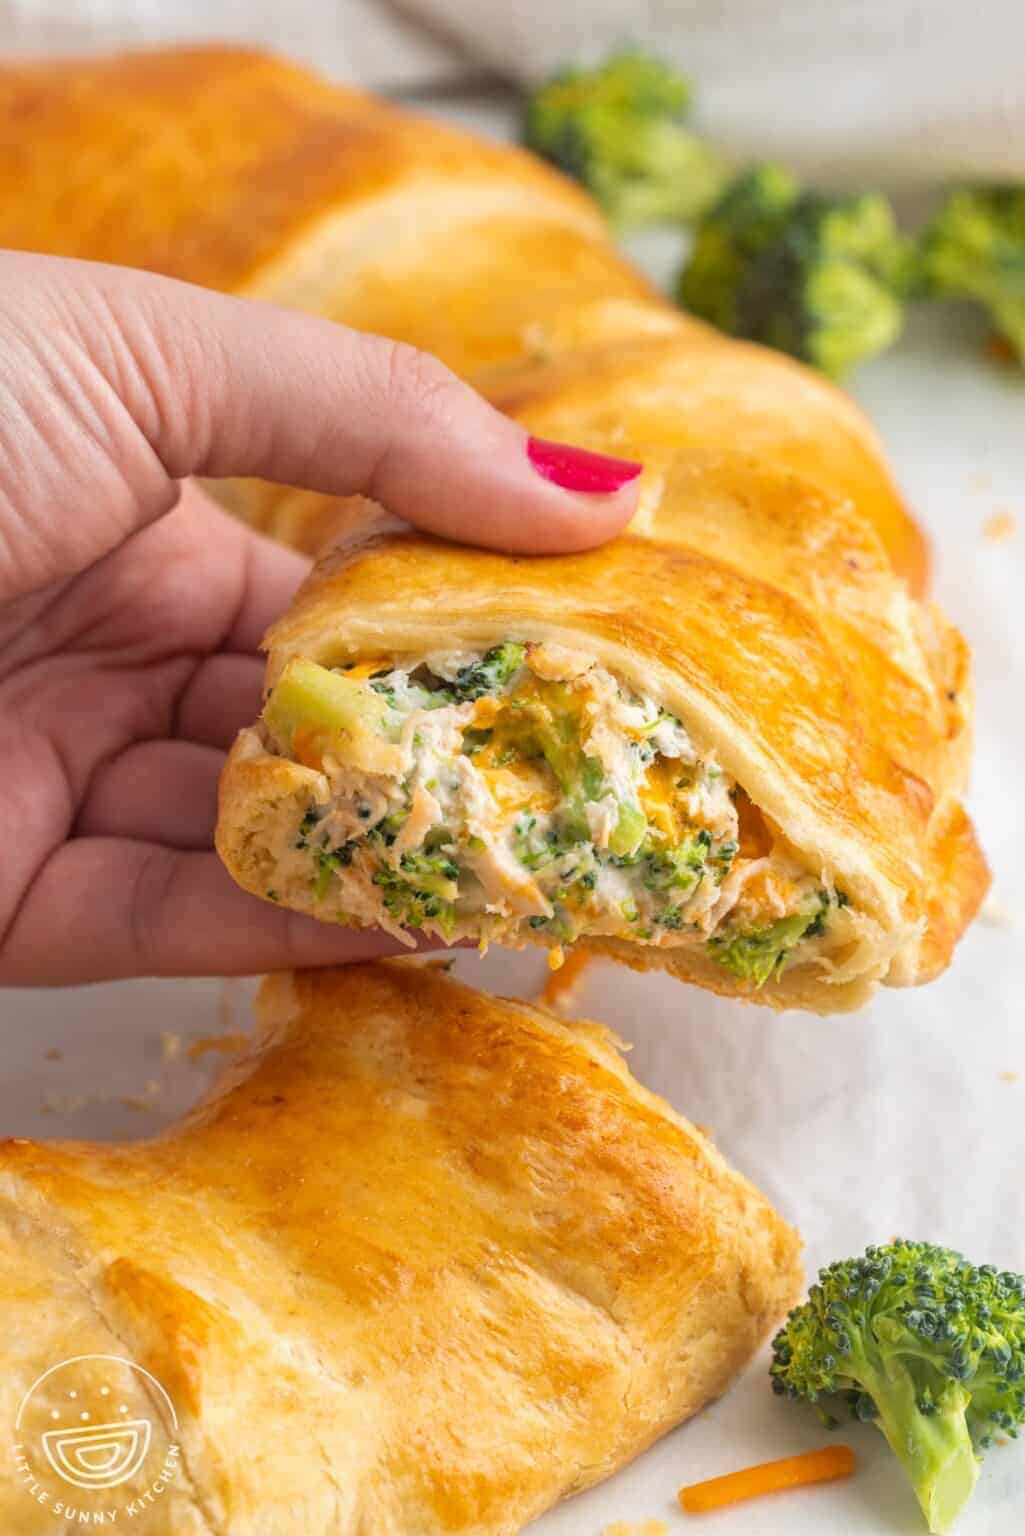 Taking a cheesy chicken and broccoli crescent slice off a larger ring.
